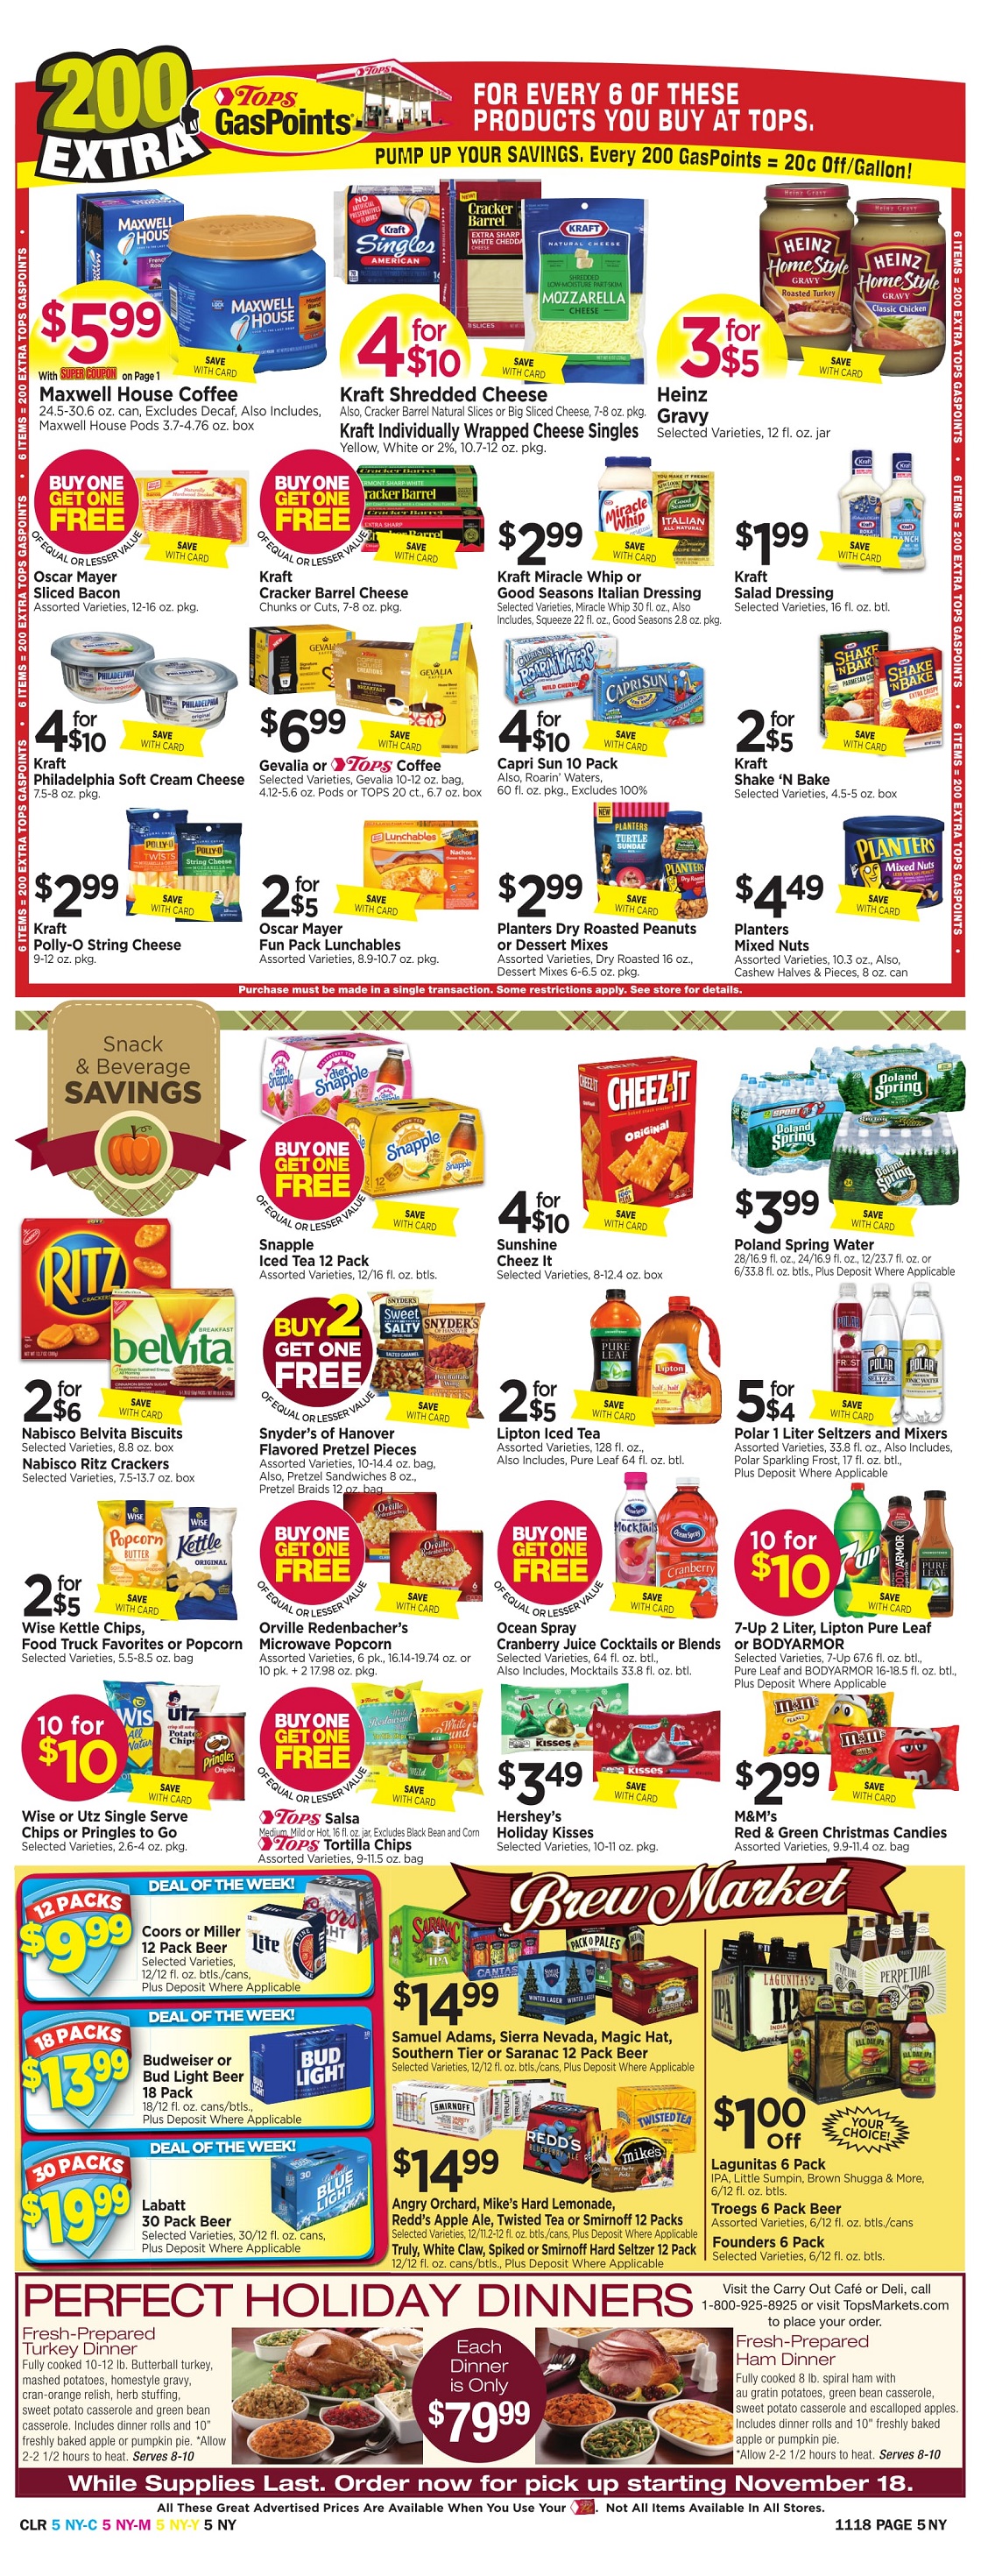 Tops Markets Ad Scan Week Pf 11 12 Page 5